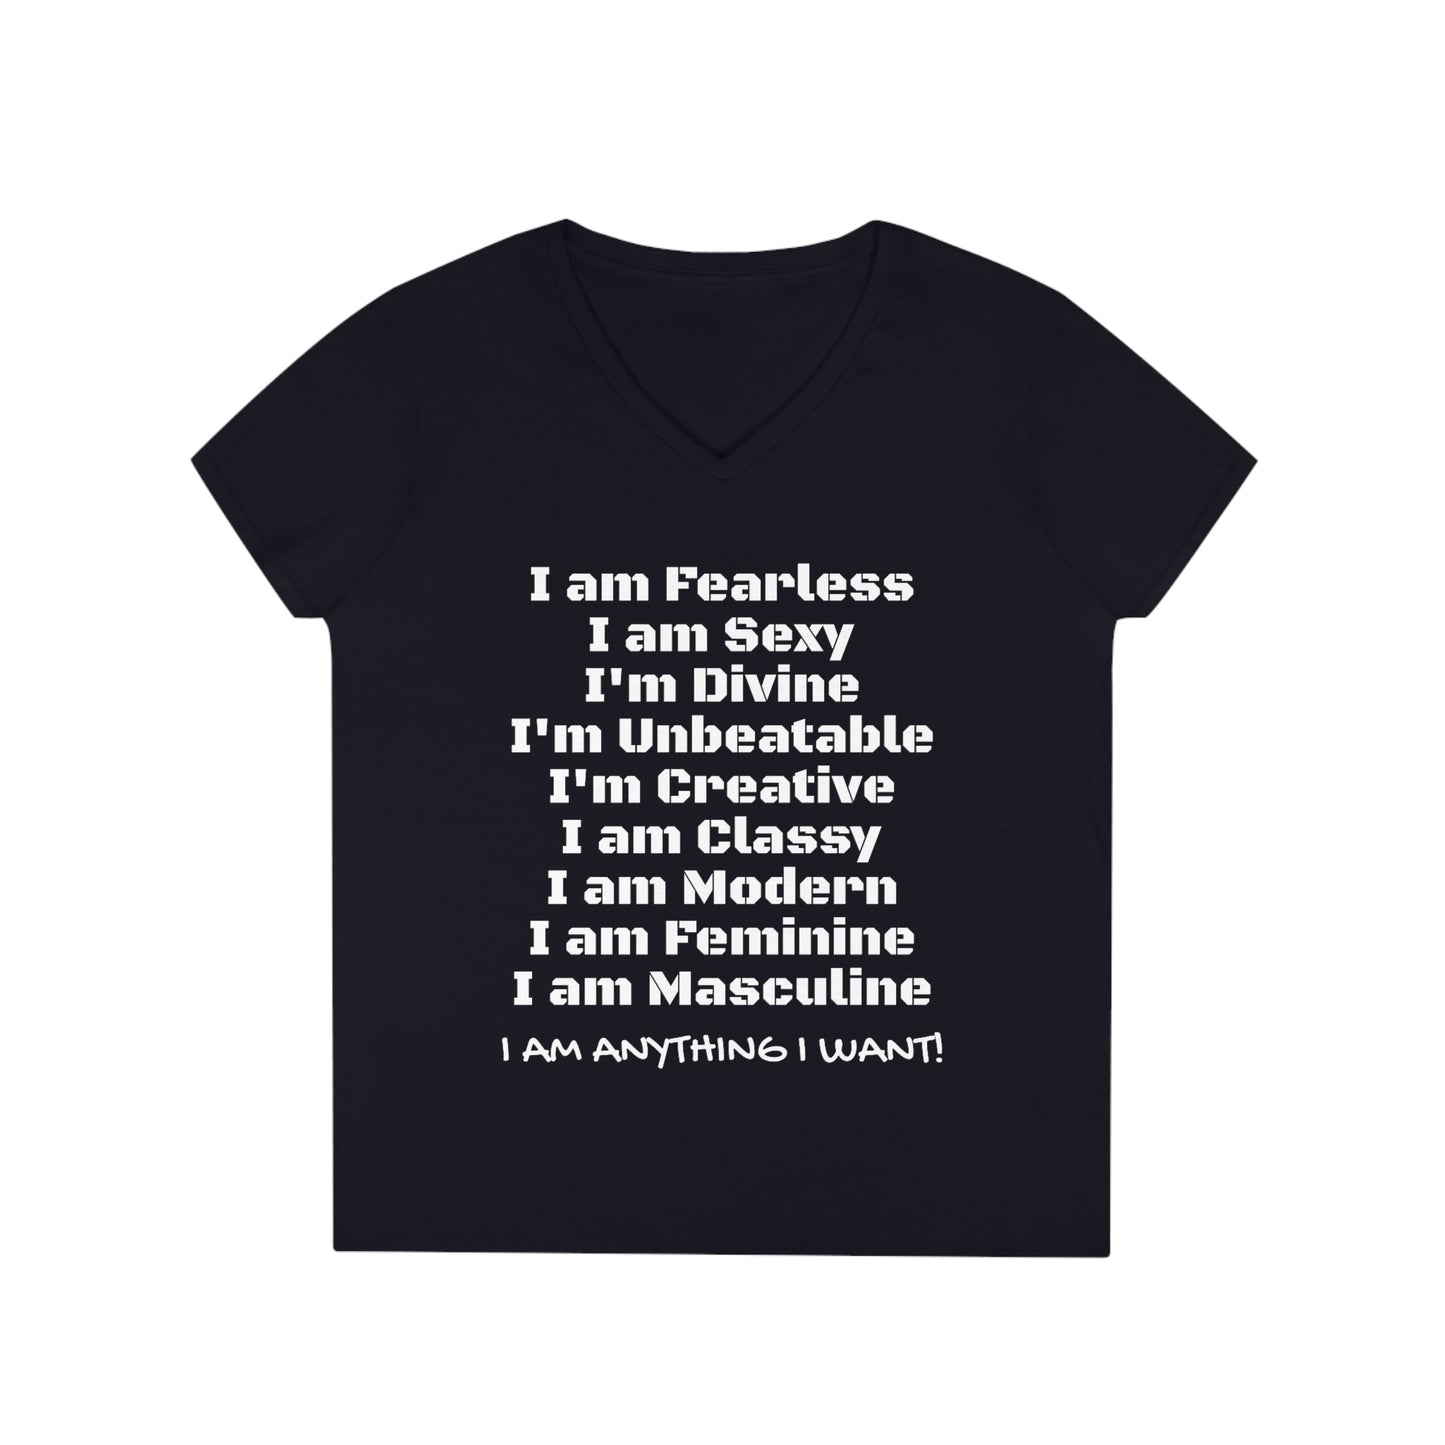 I am Fearless Ladies' V-Neck T-Shirt